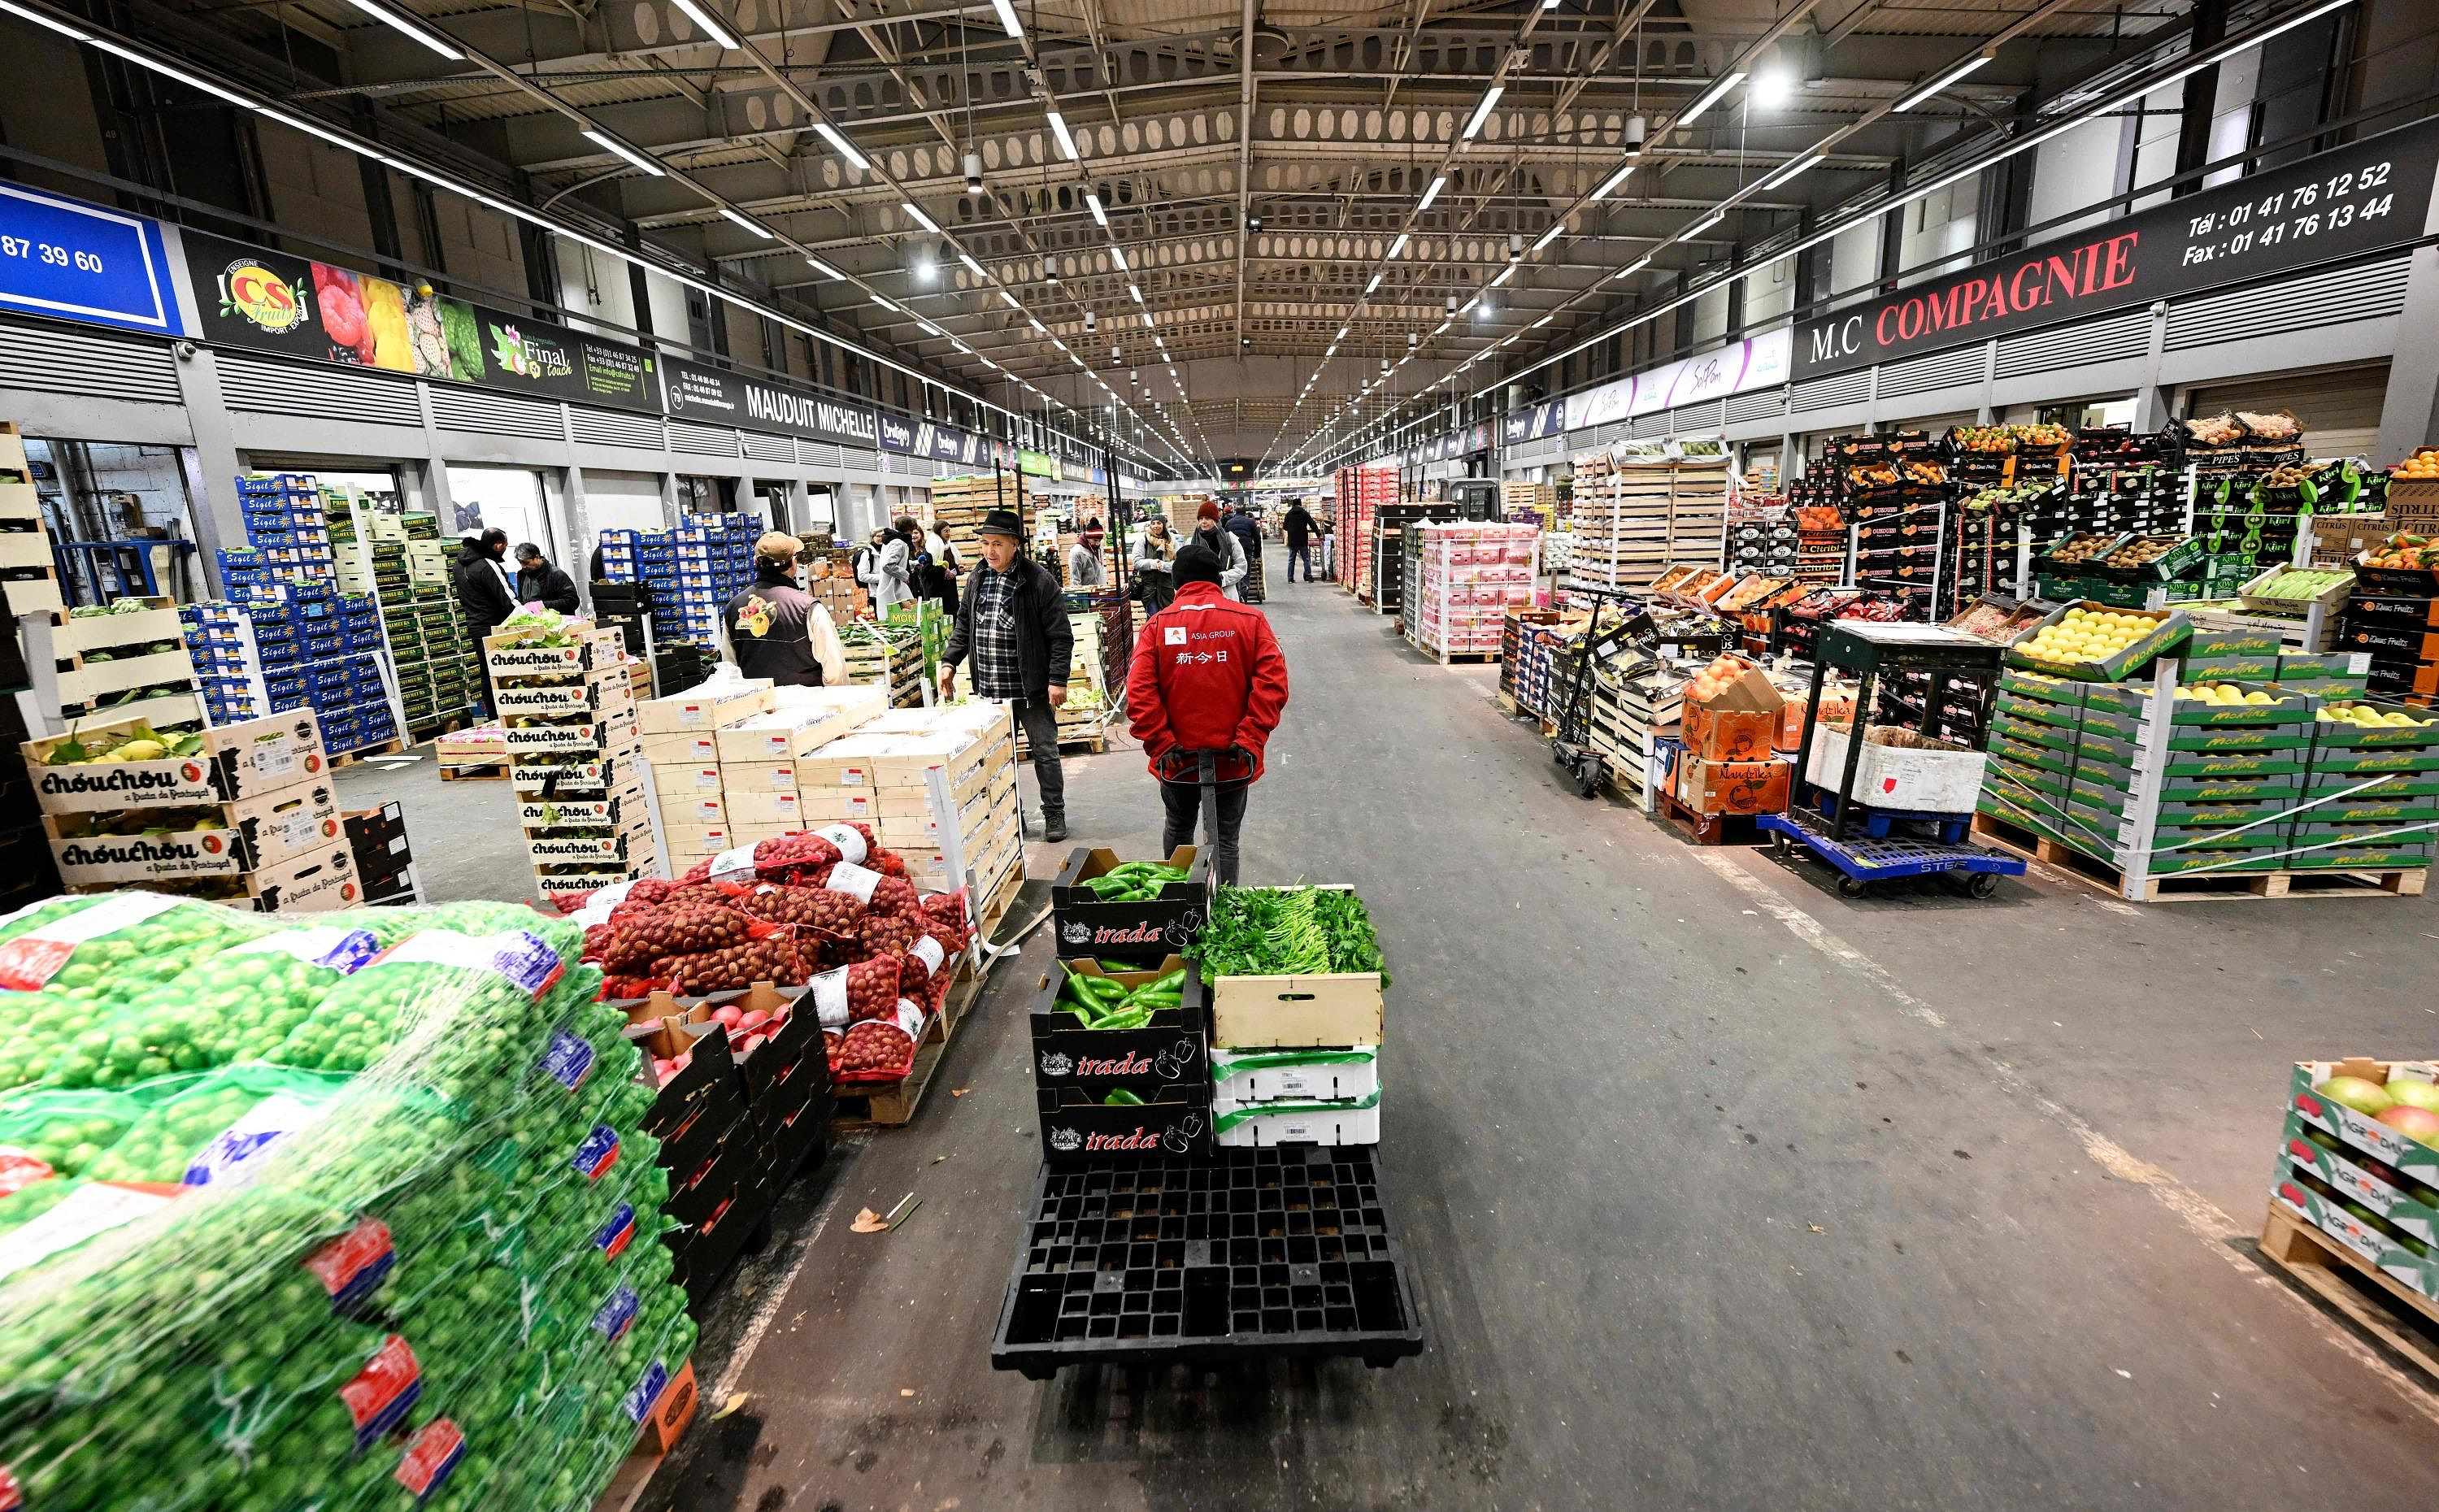 The Rungis market, this “belly of France” that farmers want to paralyze